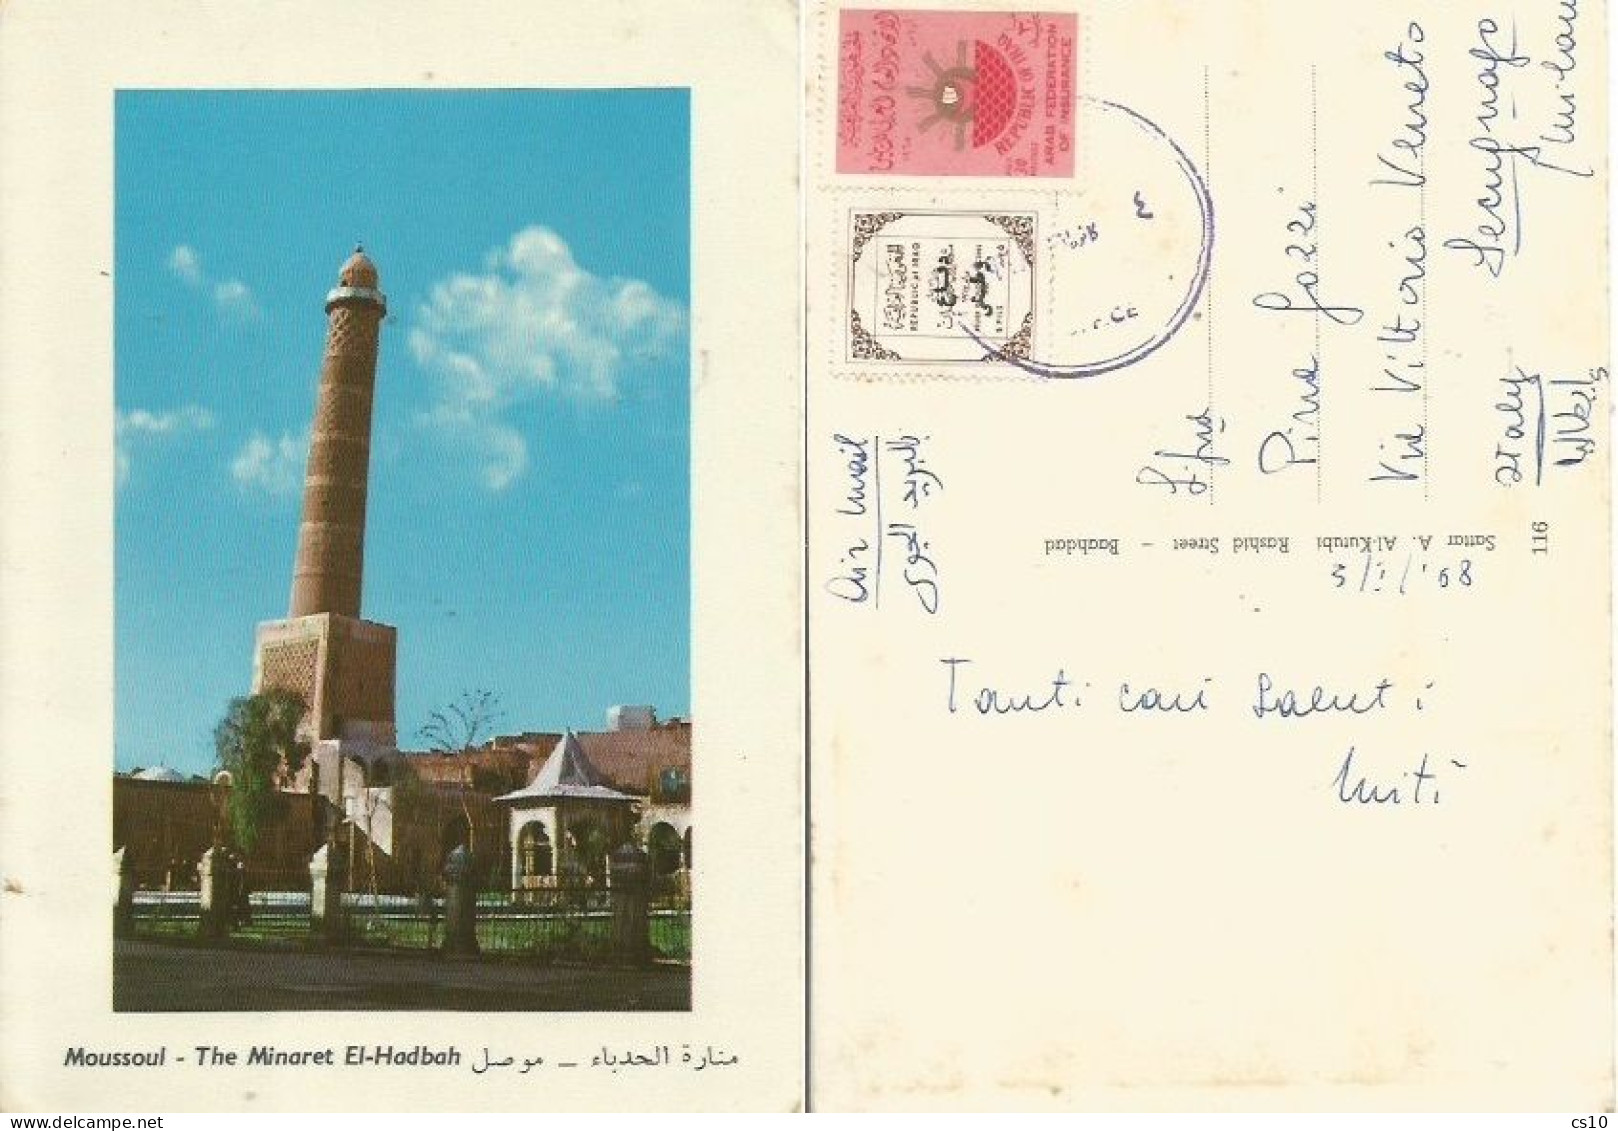 Iraq Irak Moussoul - The Minaret El-Hadbah Color Pcard Used Airmail To Italy With 2 Stamps 3jan1968 - Islam